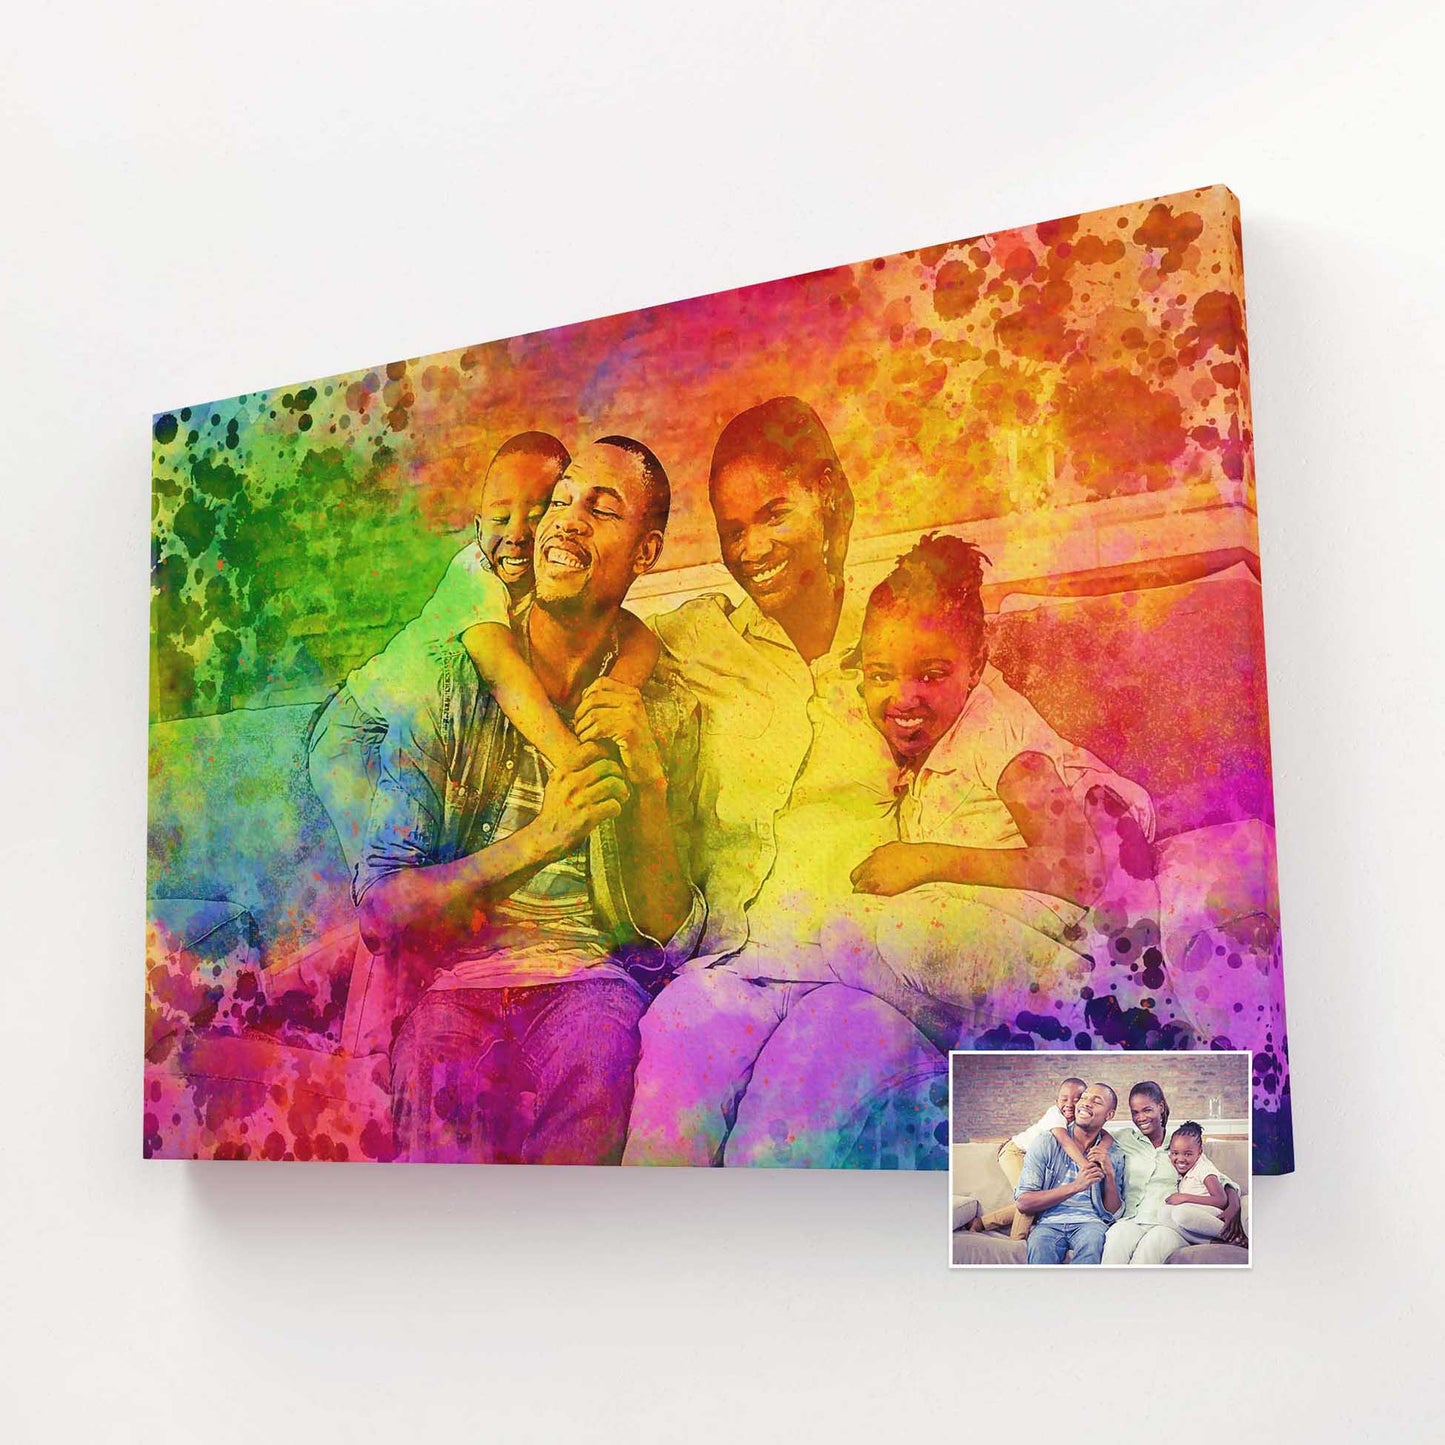 Personalised Splash of Colours Canvas is a testament to the beauty and power of art. This fine art piece is created by seamlessly blending painting from photo, watercolour, and digital art techniques. The result is a visually stunning